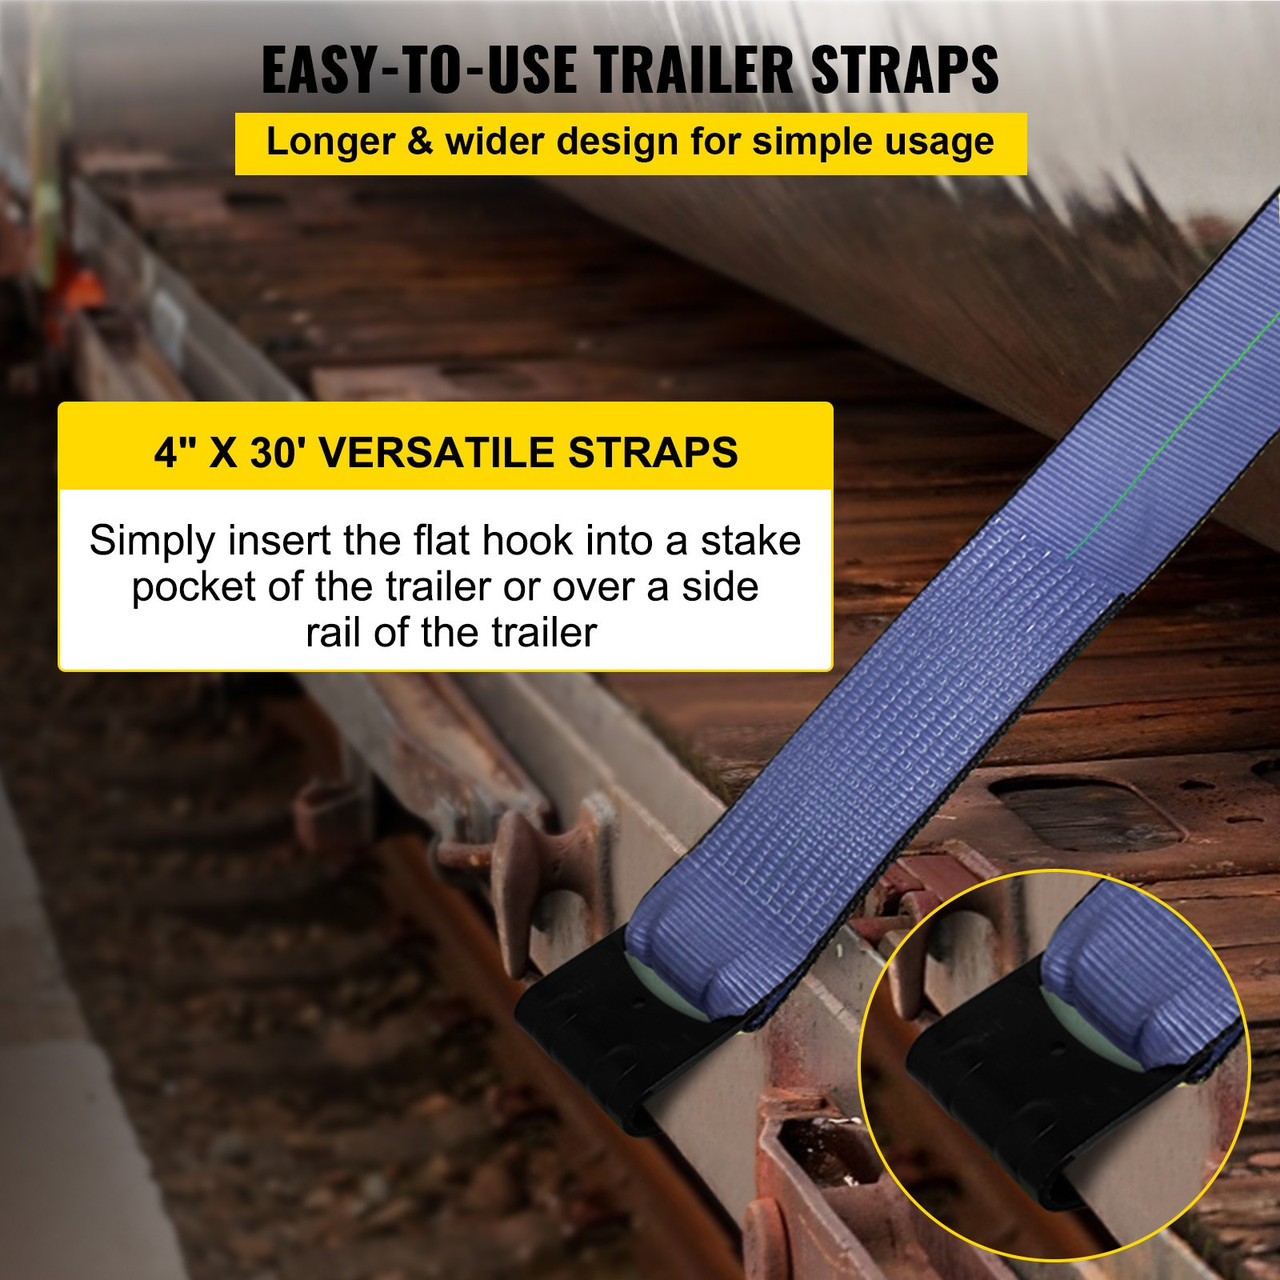 Truck Straps 4" x30' Winch Straps with a Flat Hook Flatbed Tie Downs 15400lbs Load Capacity Flatbed Strap Cargo Control for Flatbeds, Trucks, Trailers, Farms, Rescues, Tree Saver, Blue(10 Pack)